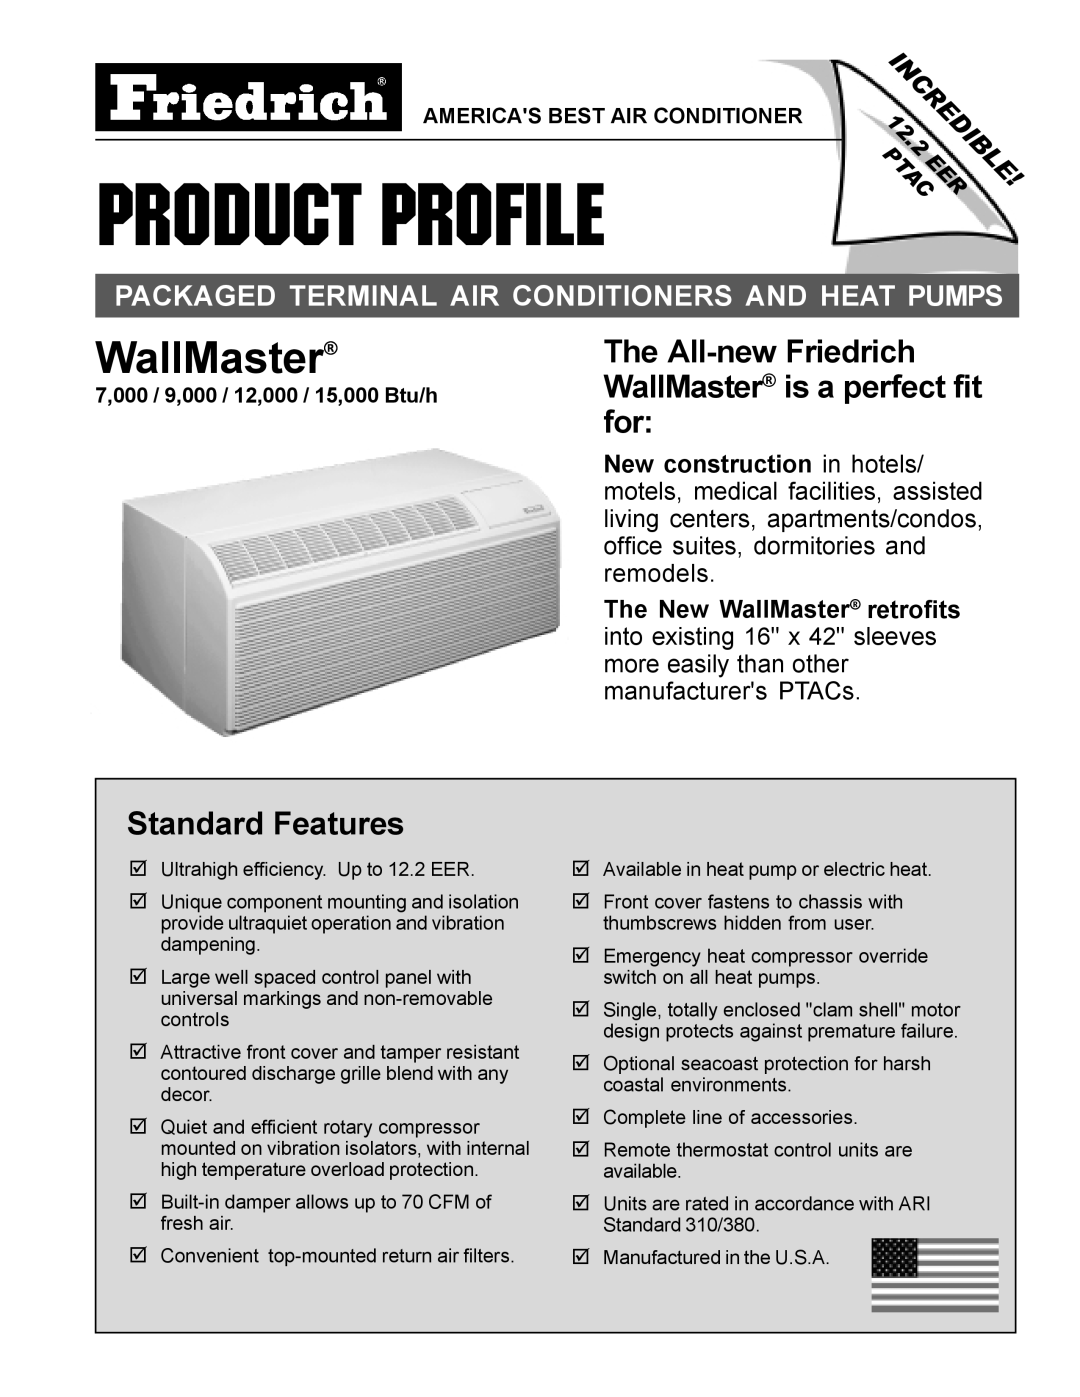 Friedrich PACKAGED TERMINAL AIR CONDITIONERS AND HEAT PUMPS manual Packaged Terminal Air Conditioners And Heat Pumps 